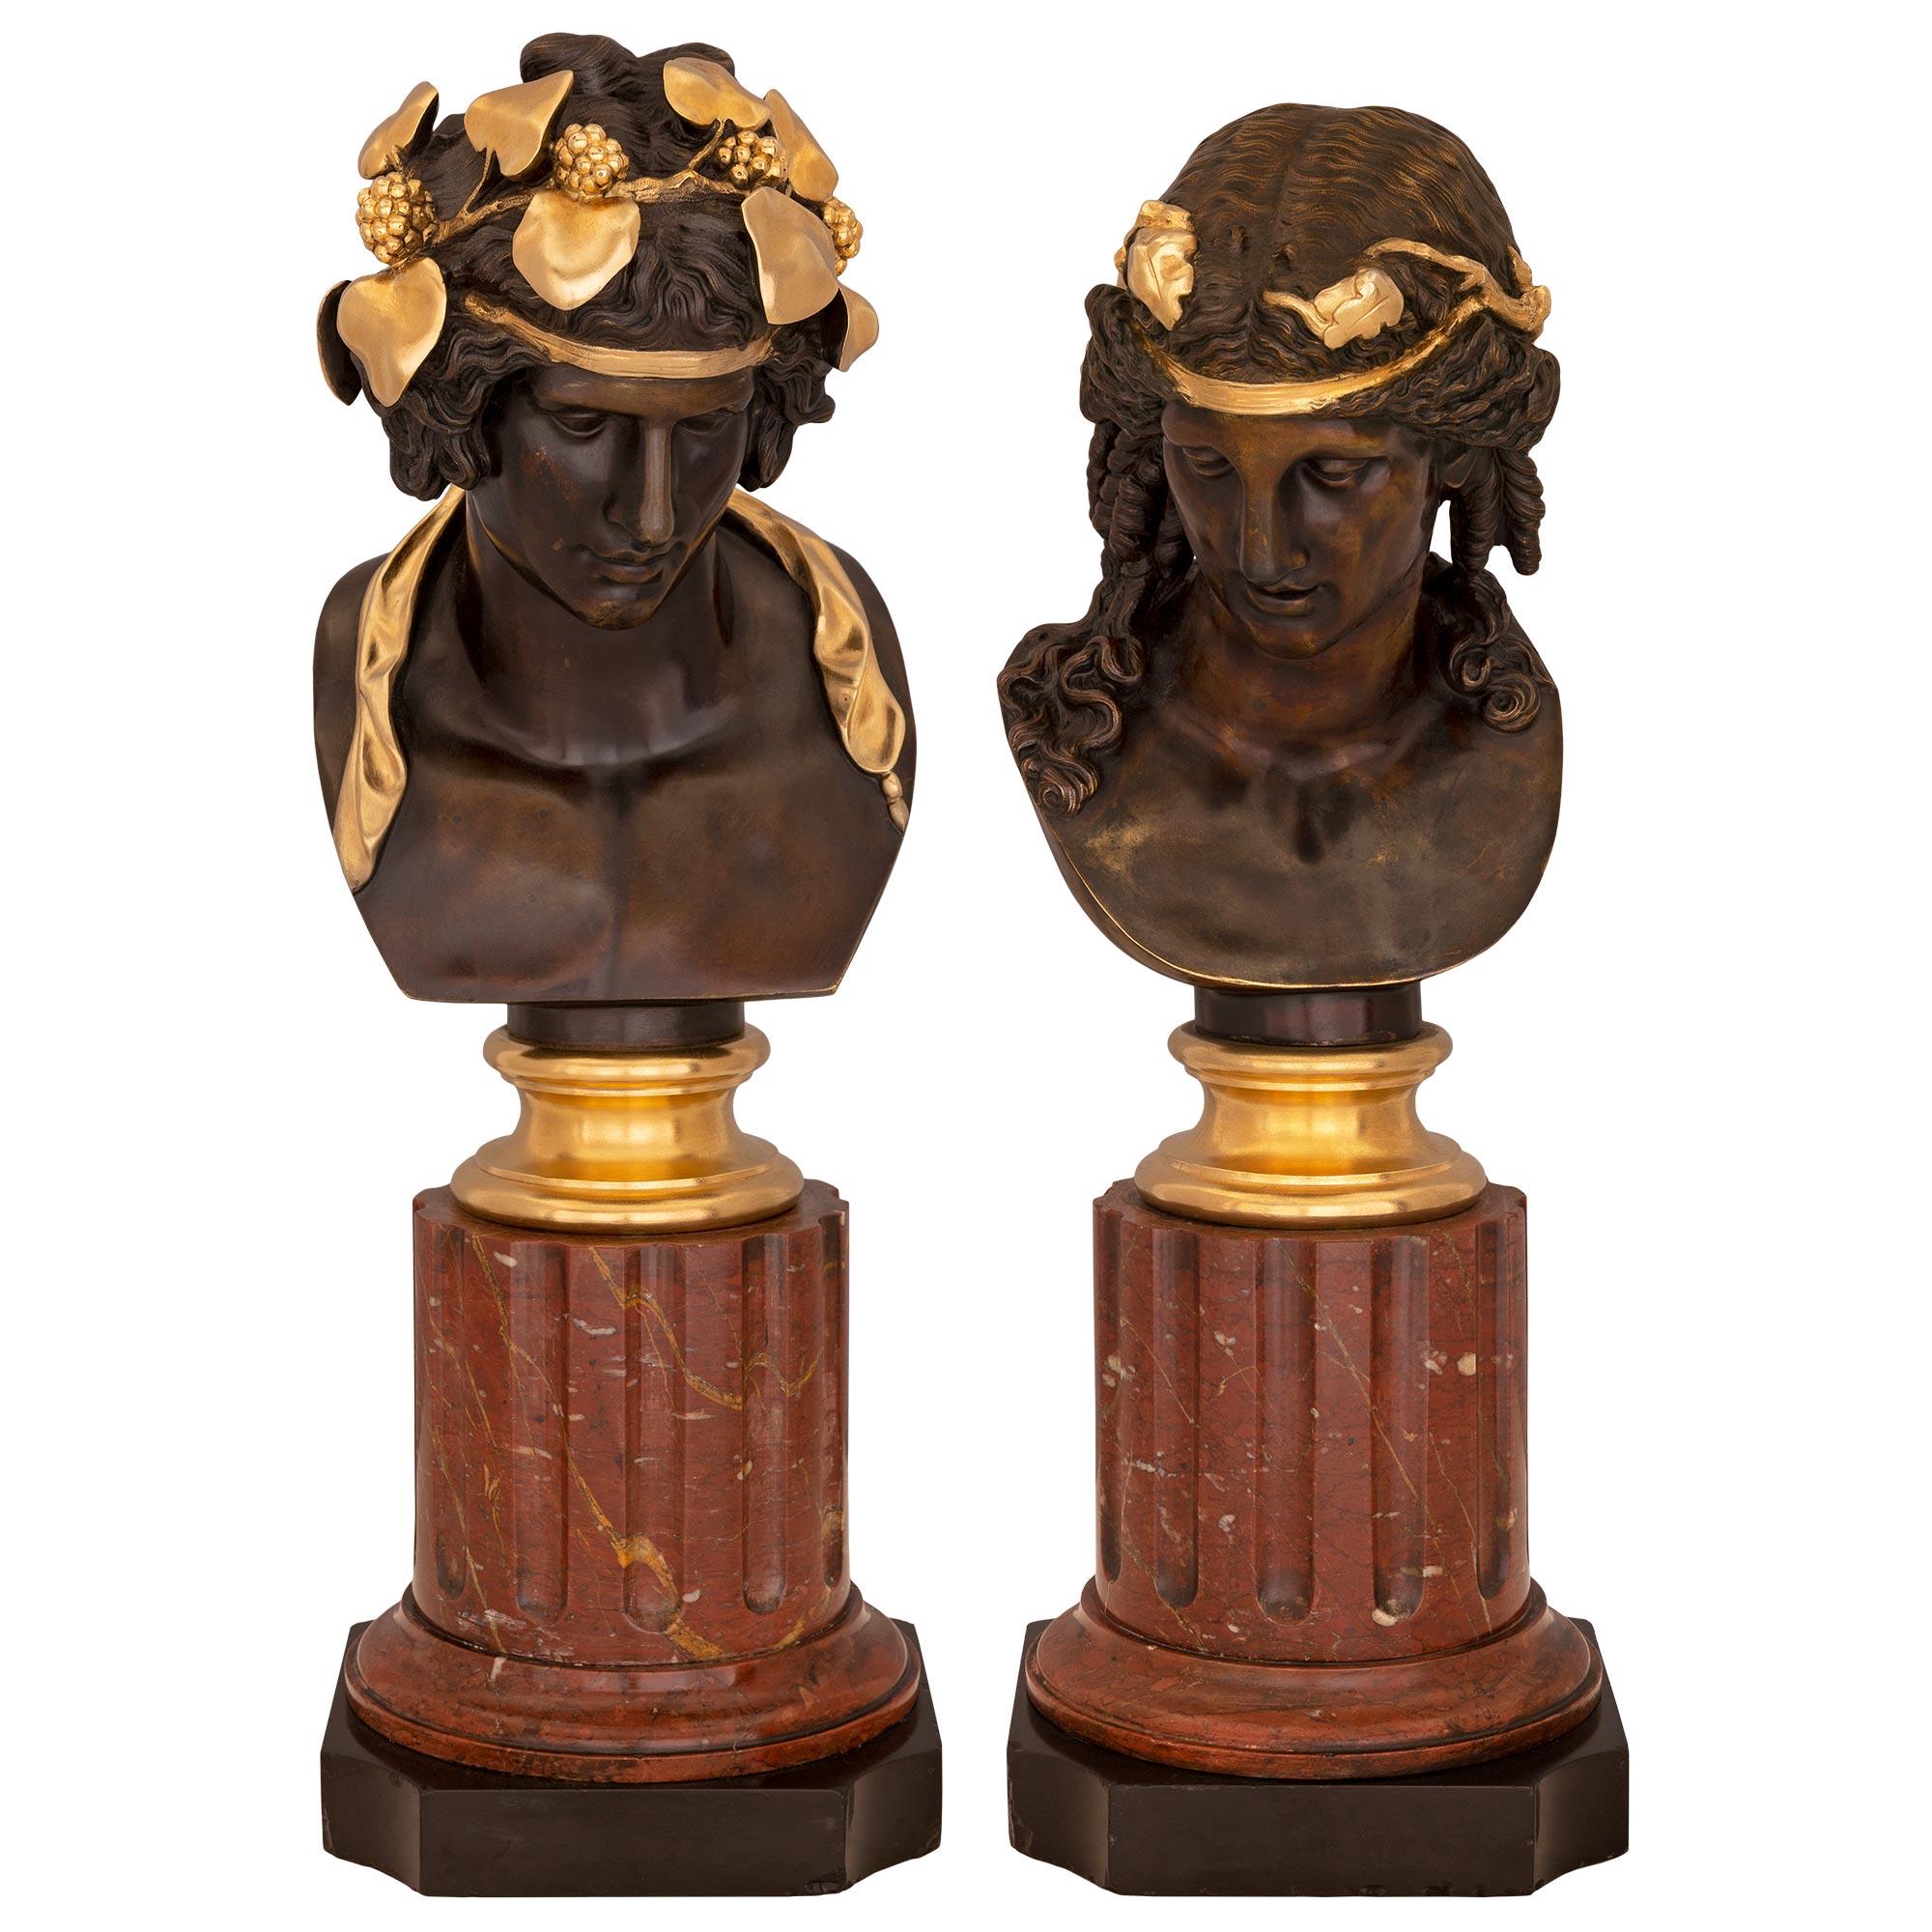 A striking and high quality true pair of French 19th century Louis XVI st. Belle Époque period patinated bronze, ormolu, Rouge Griotte, and black Belgian marble busts attributed to Ferdinand Barbedienne. The busts depict the Greek god Bacchus to the